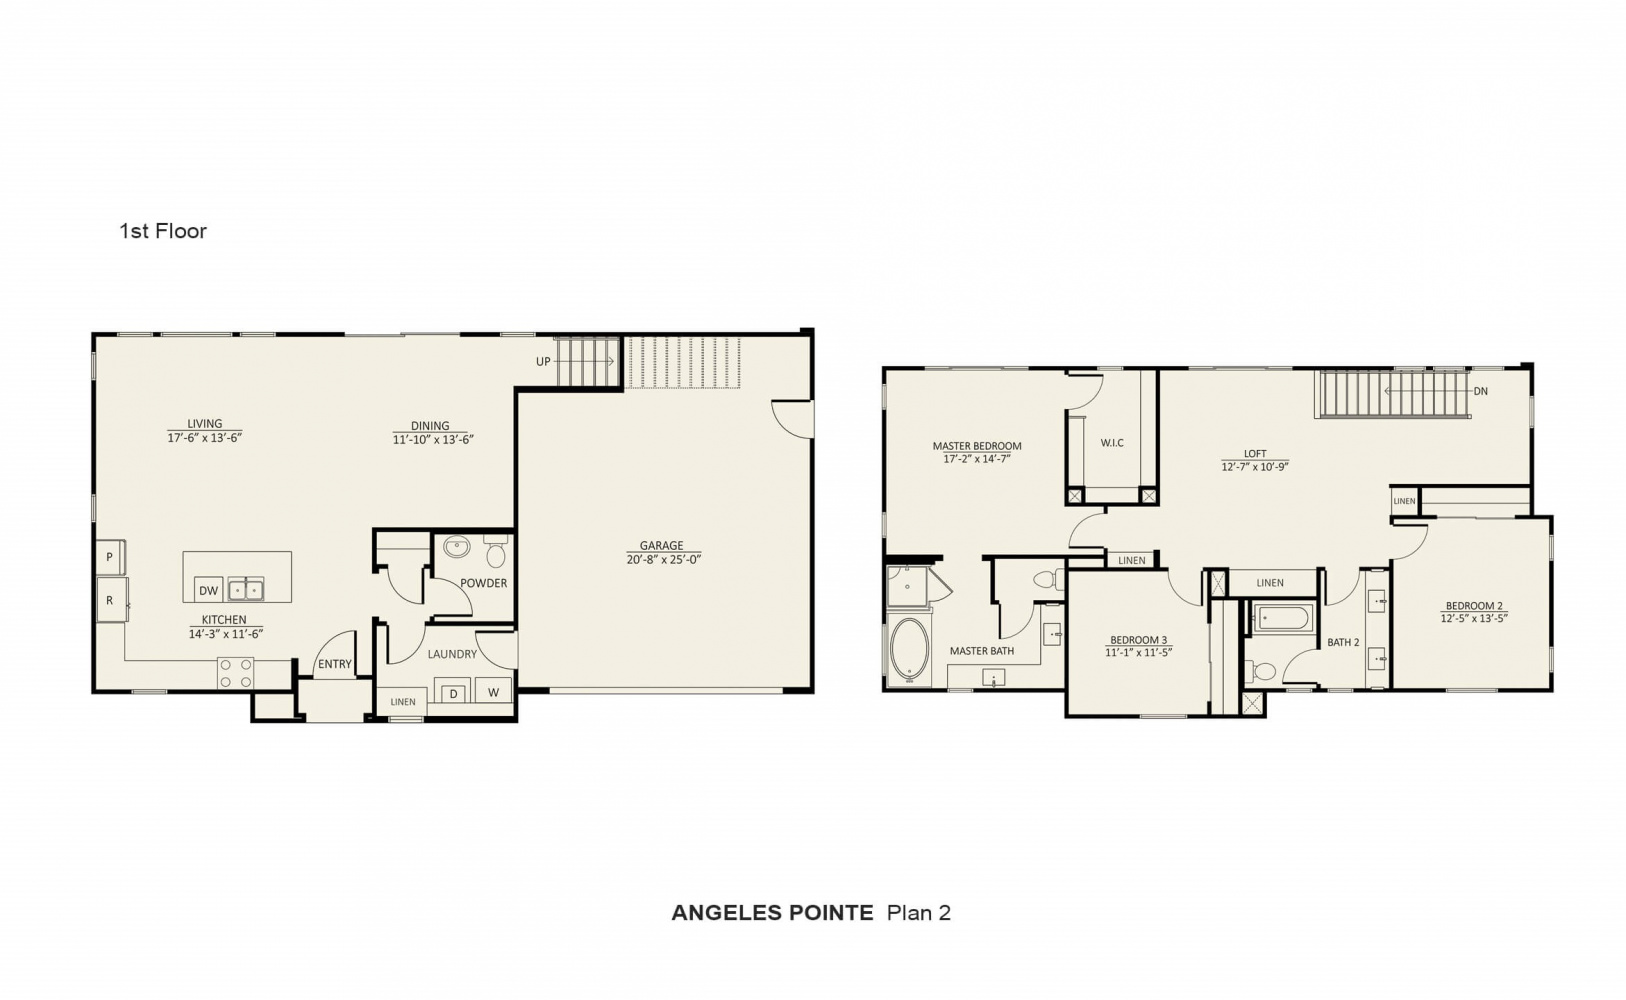 Plan 2 of New Homes at Angeles Pointe in Lake View Terrace, CA